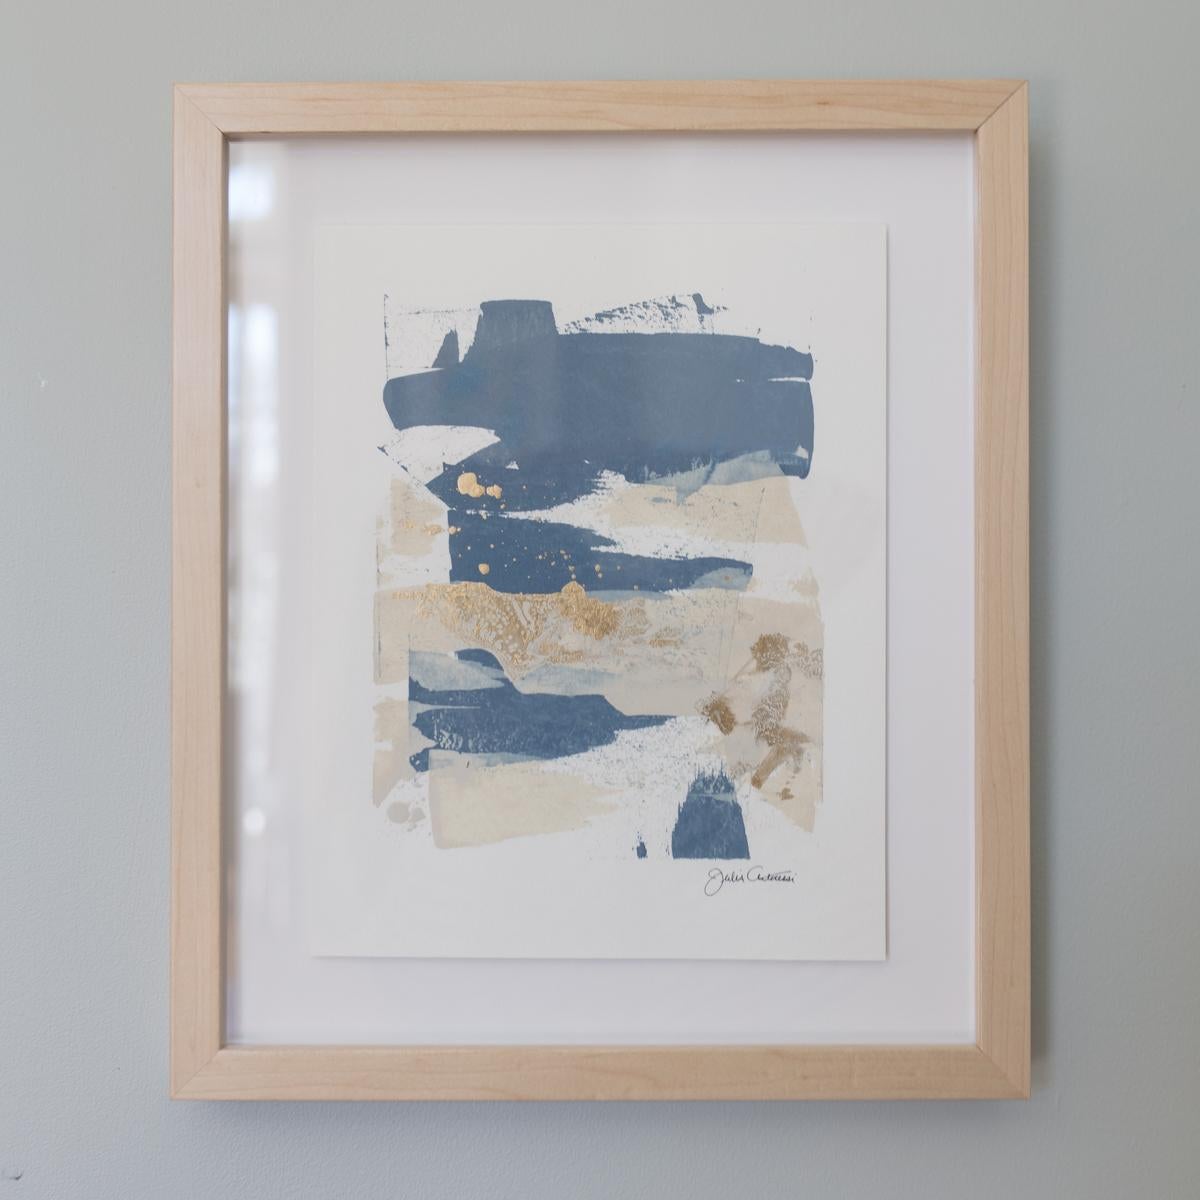 This original abstract painting is made on paper, and composed of blue, and creme strokes of paint with metallic gold accents. It is float mounted and framed in a solid natural wood moulding. Framed, it measures 13.25" x 15.75".  It is wired and